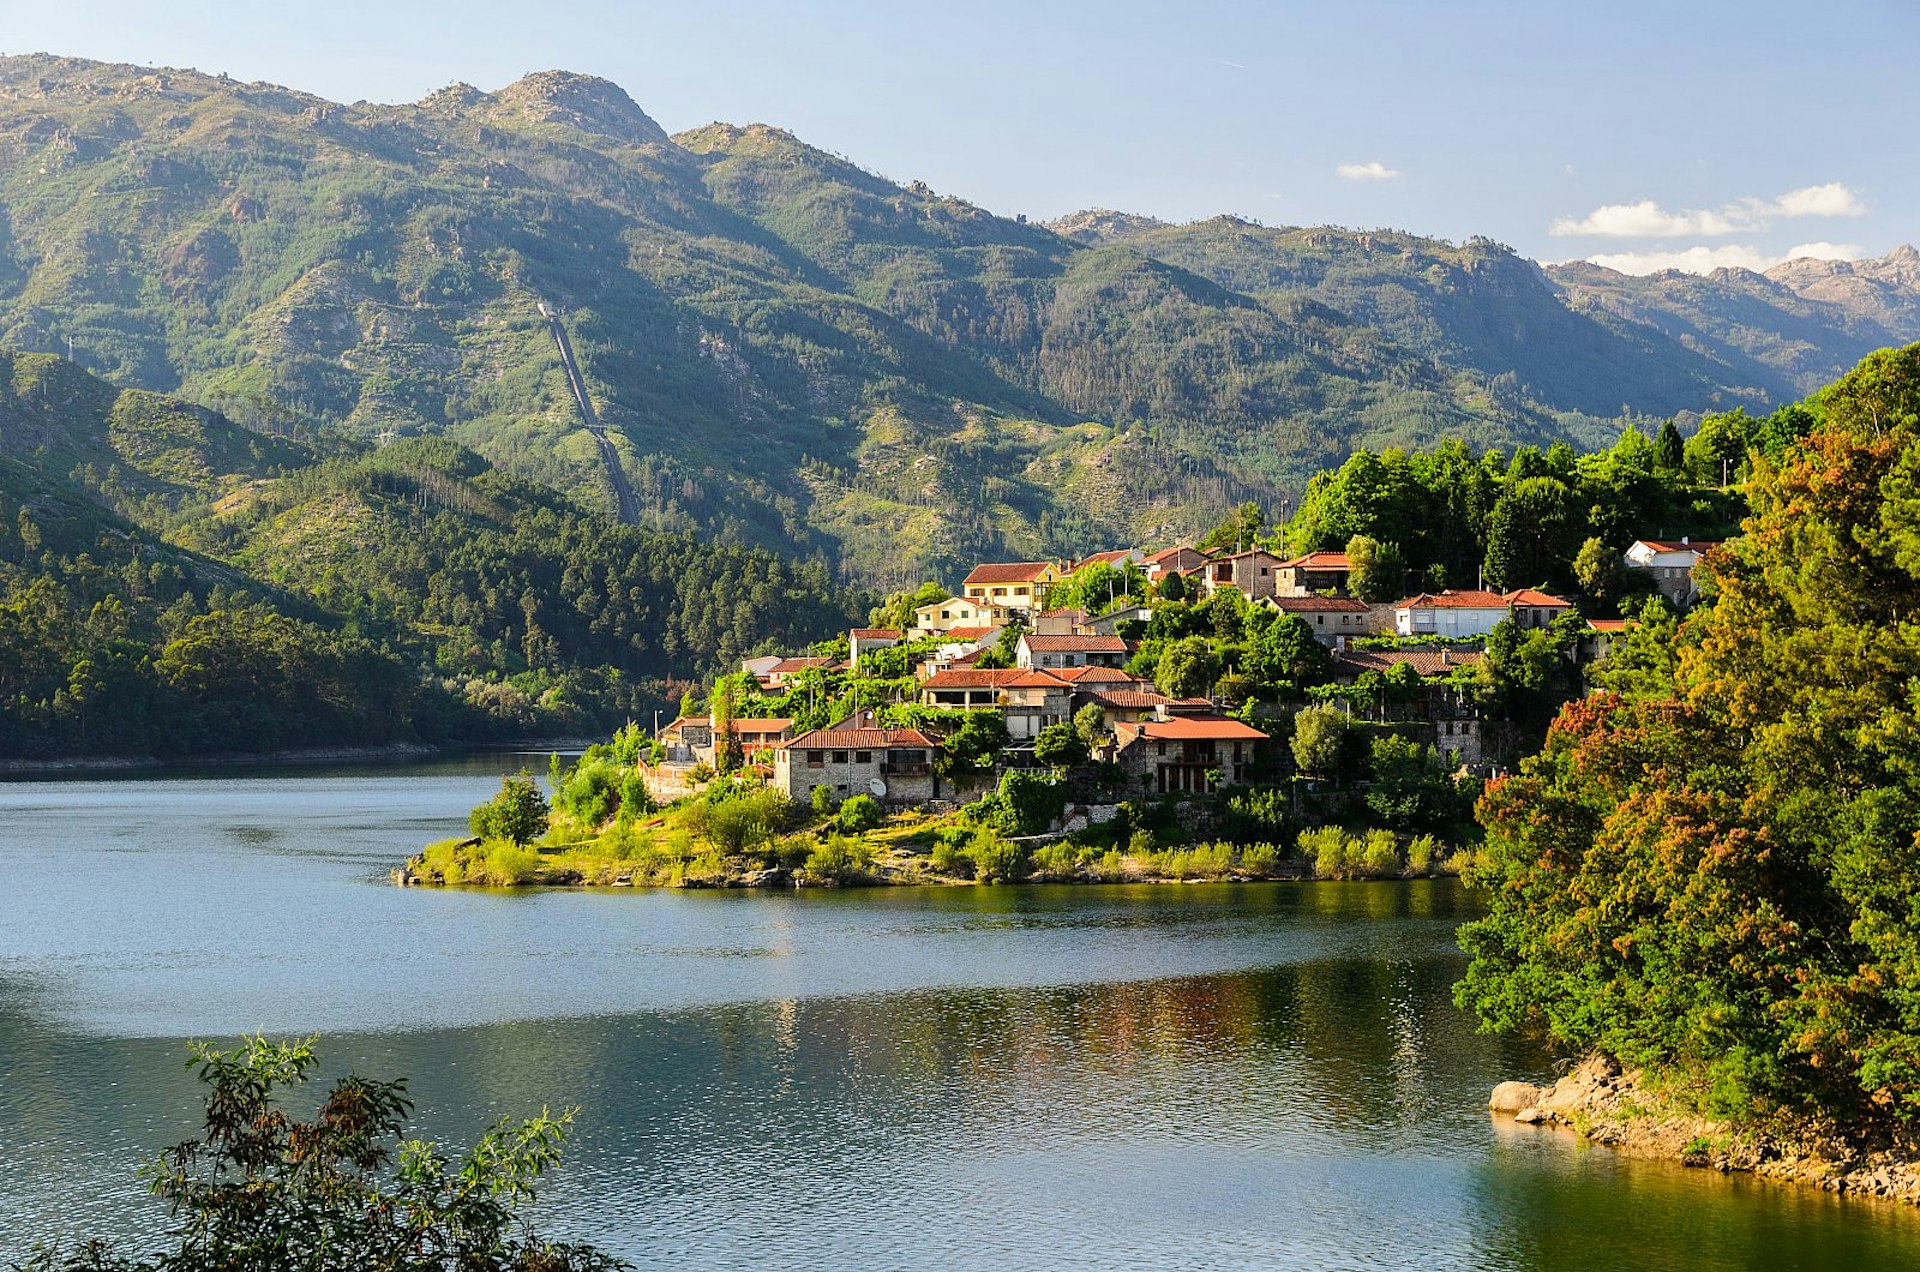 A view of a village clinging to a hill rising from the banks of the Cavado river in Peneda-Gerês national park in northern Portugal, with rugged green hills beyond.